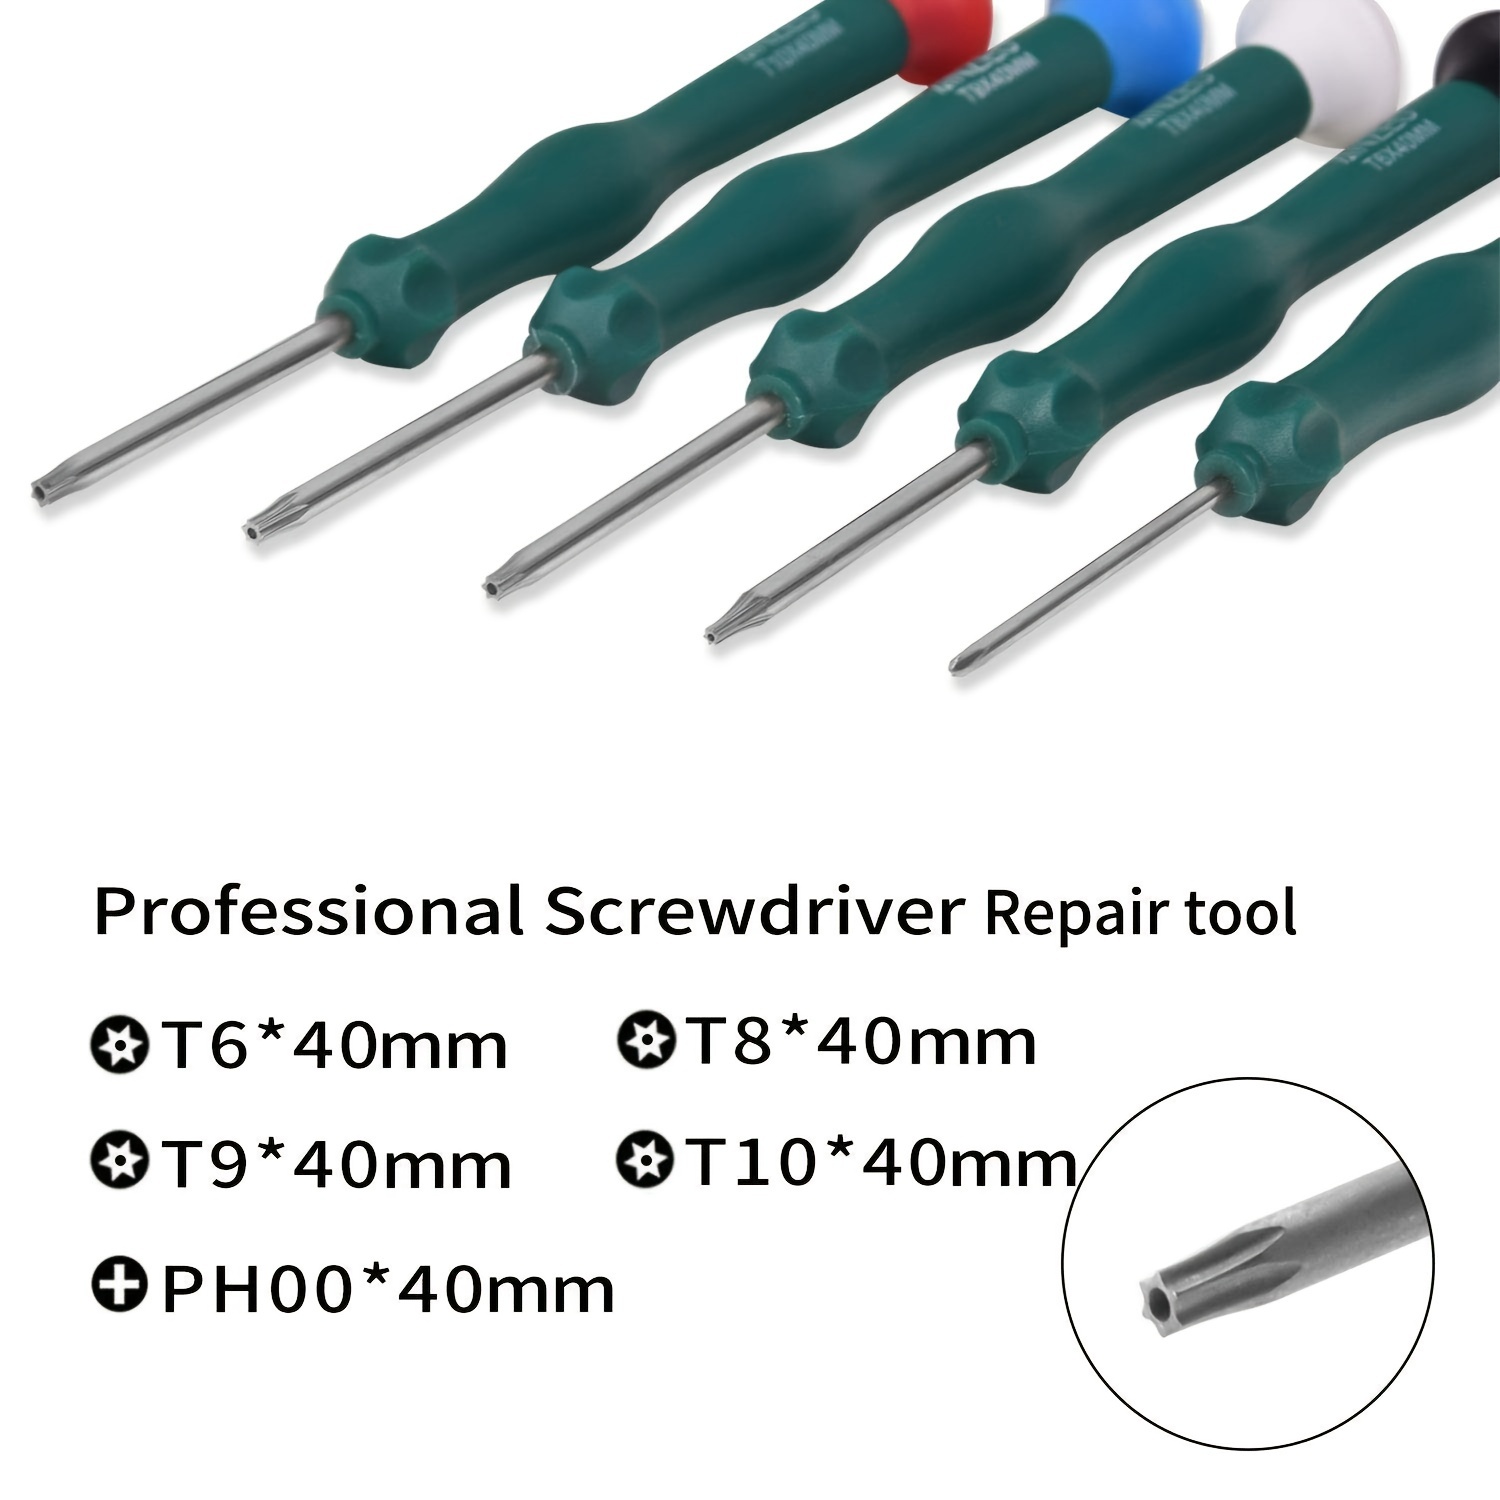 Cleaning Repair Tool Kit for PS4 PS5 TR9 Torx Security Screwdriver